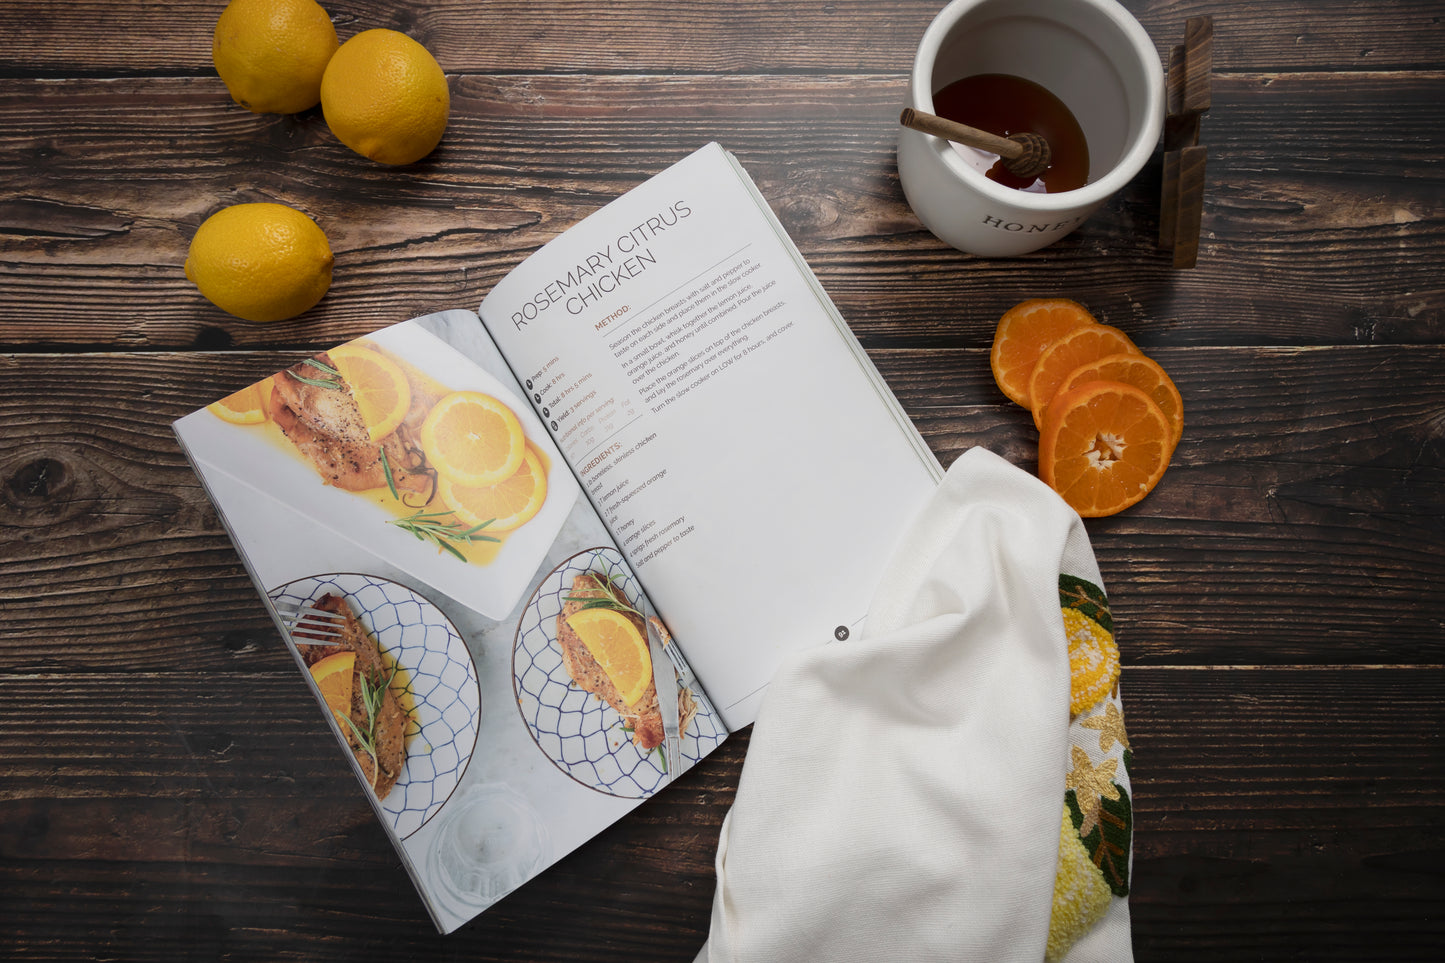 An opened Paleo Slow Cooker Cookbook on a wooden surface with lemon, a kitchen cloth and a jar of honey.